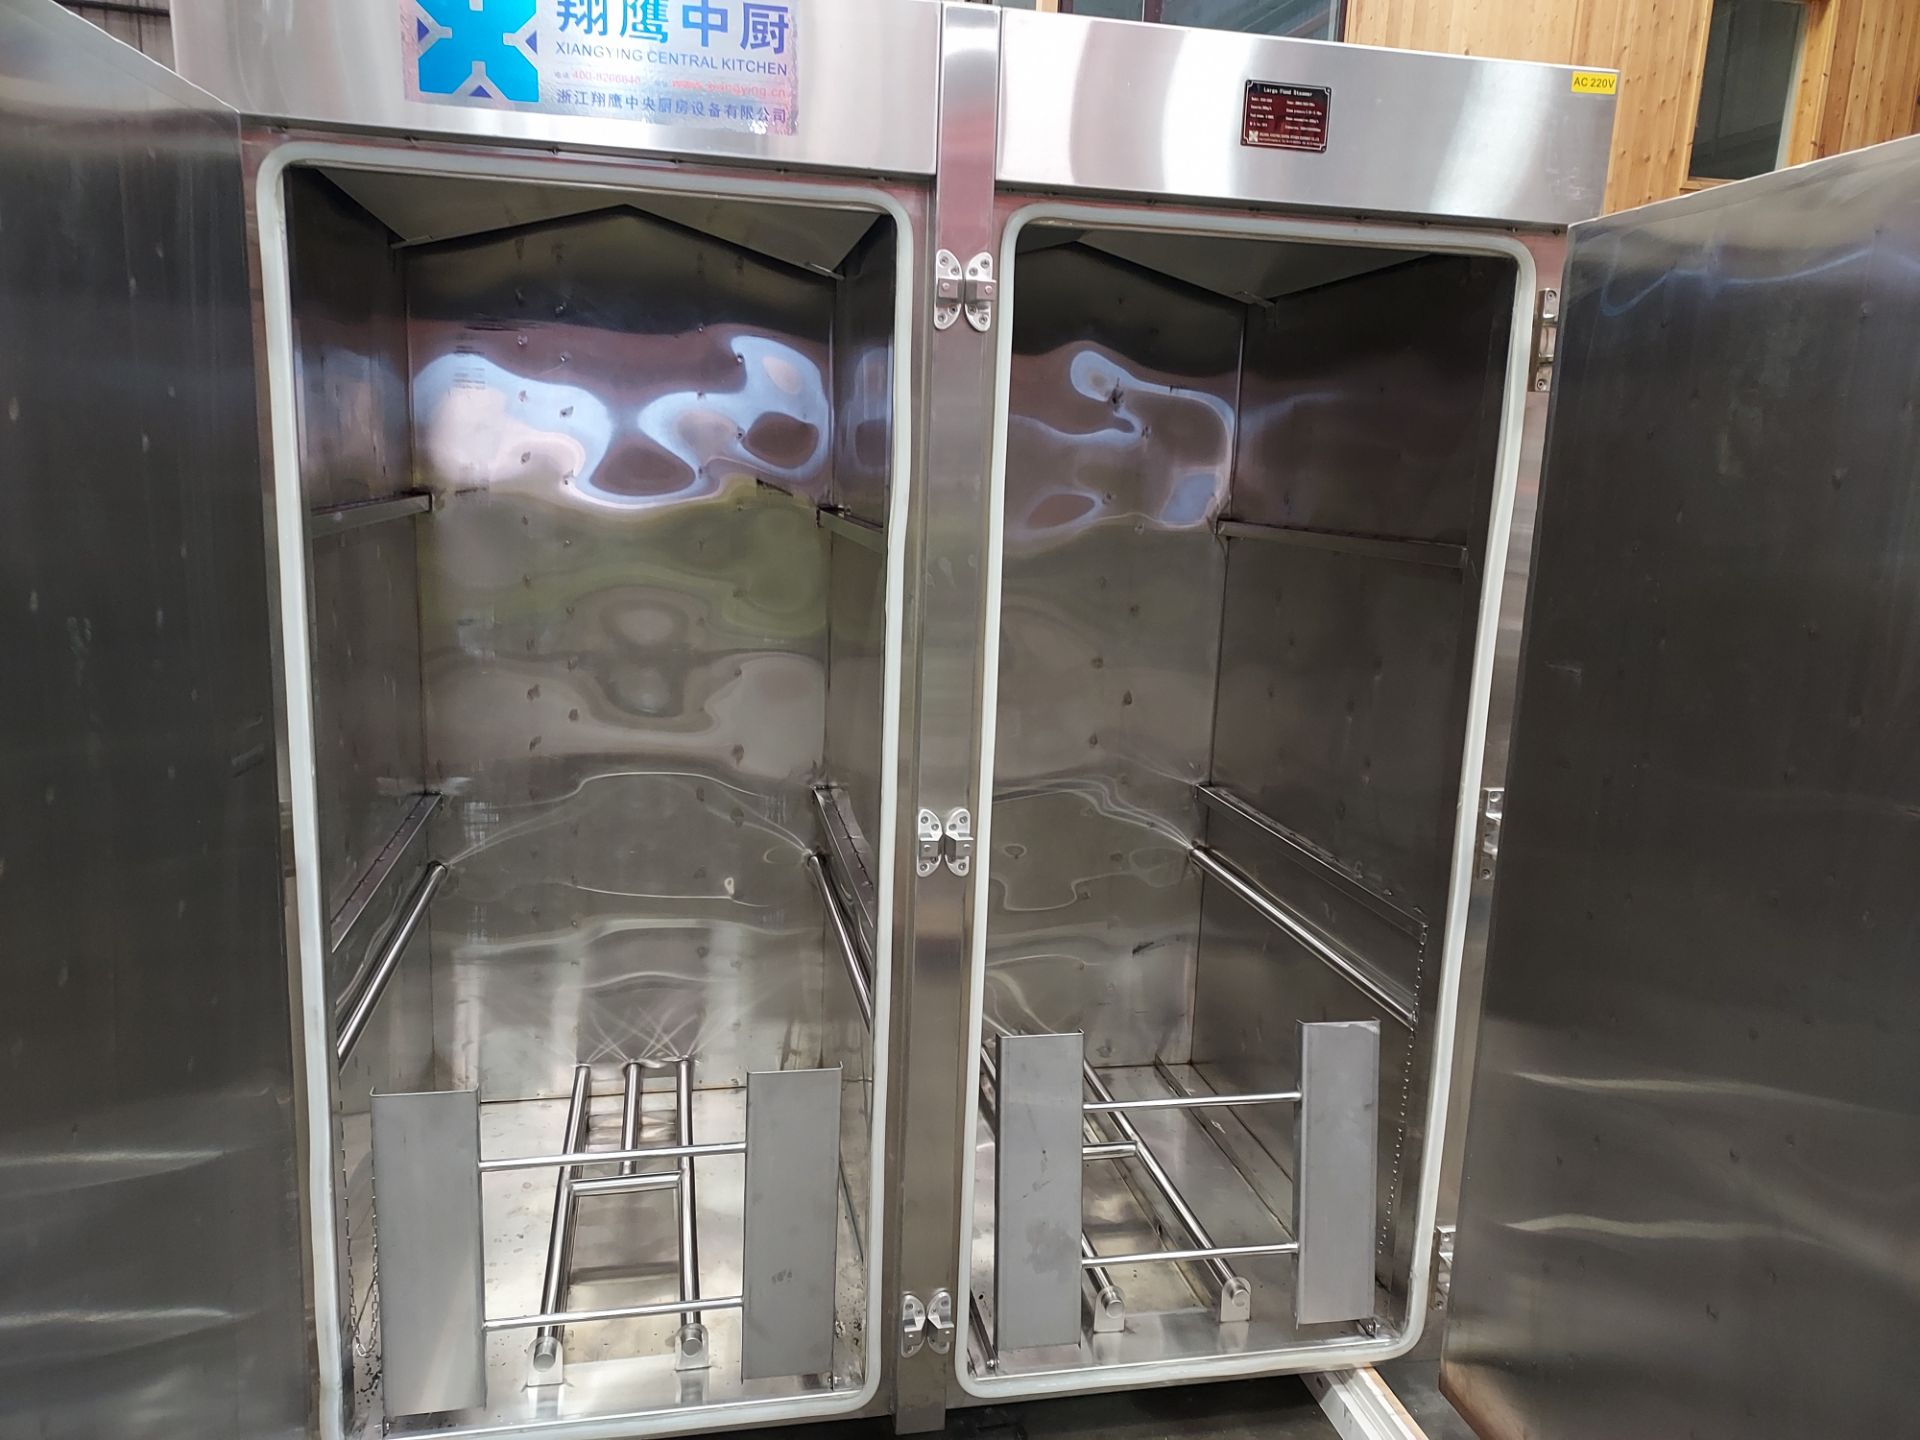 BRAND NEW STAINLESS STEEL COMMERCIAL FOOD STEAMING CABINET FOR WHOLESALE FOOD PRODUCTION BY - Image 5 of 10